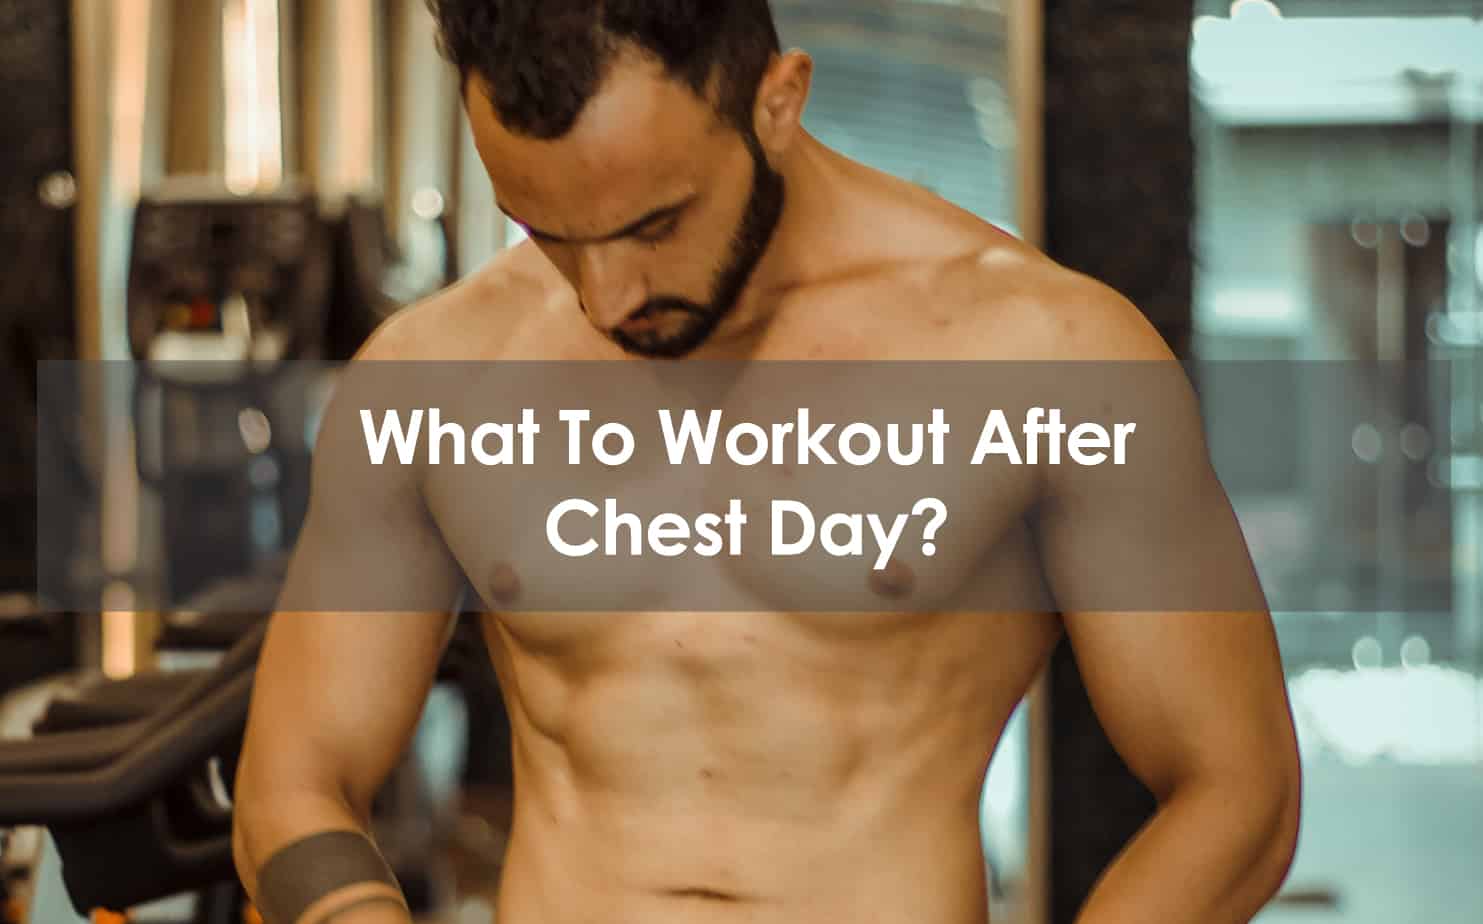 What To Workout After Chest Day?